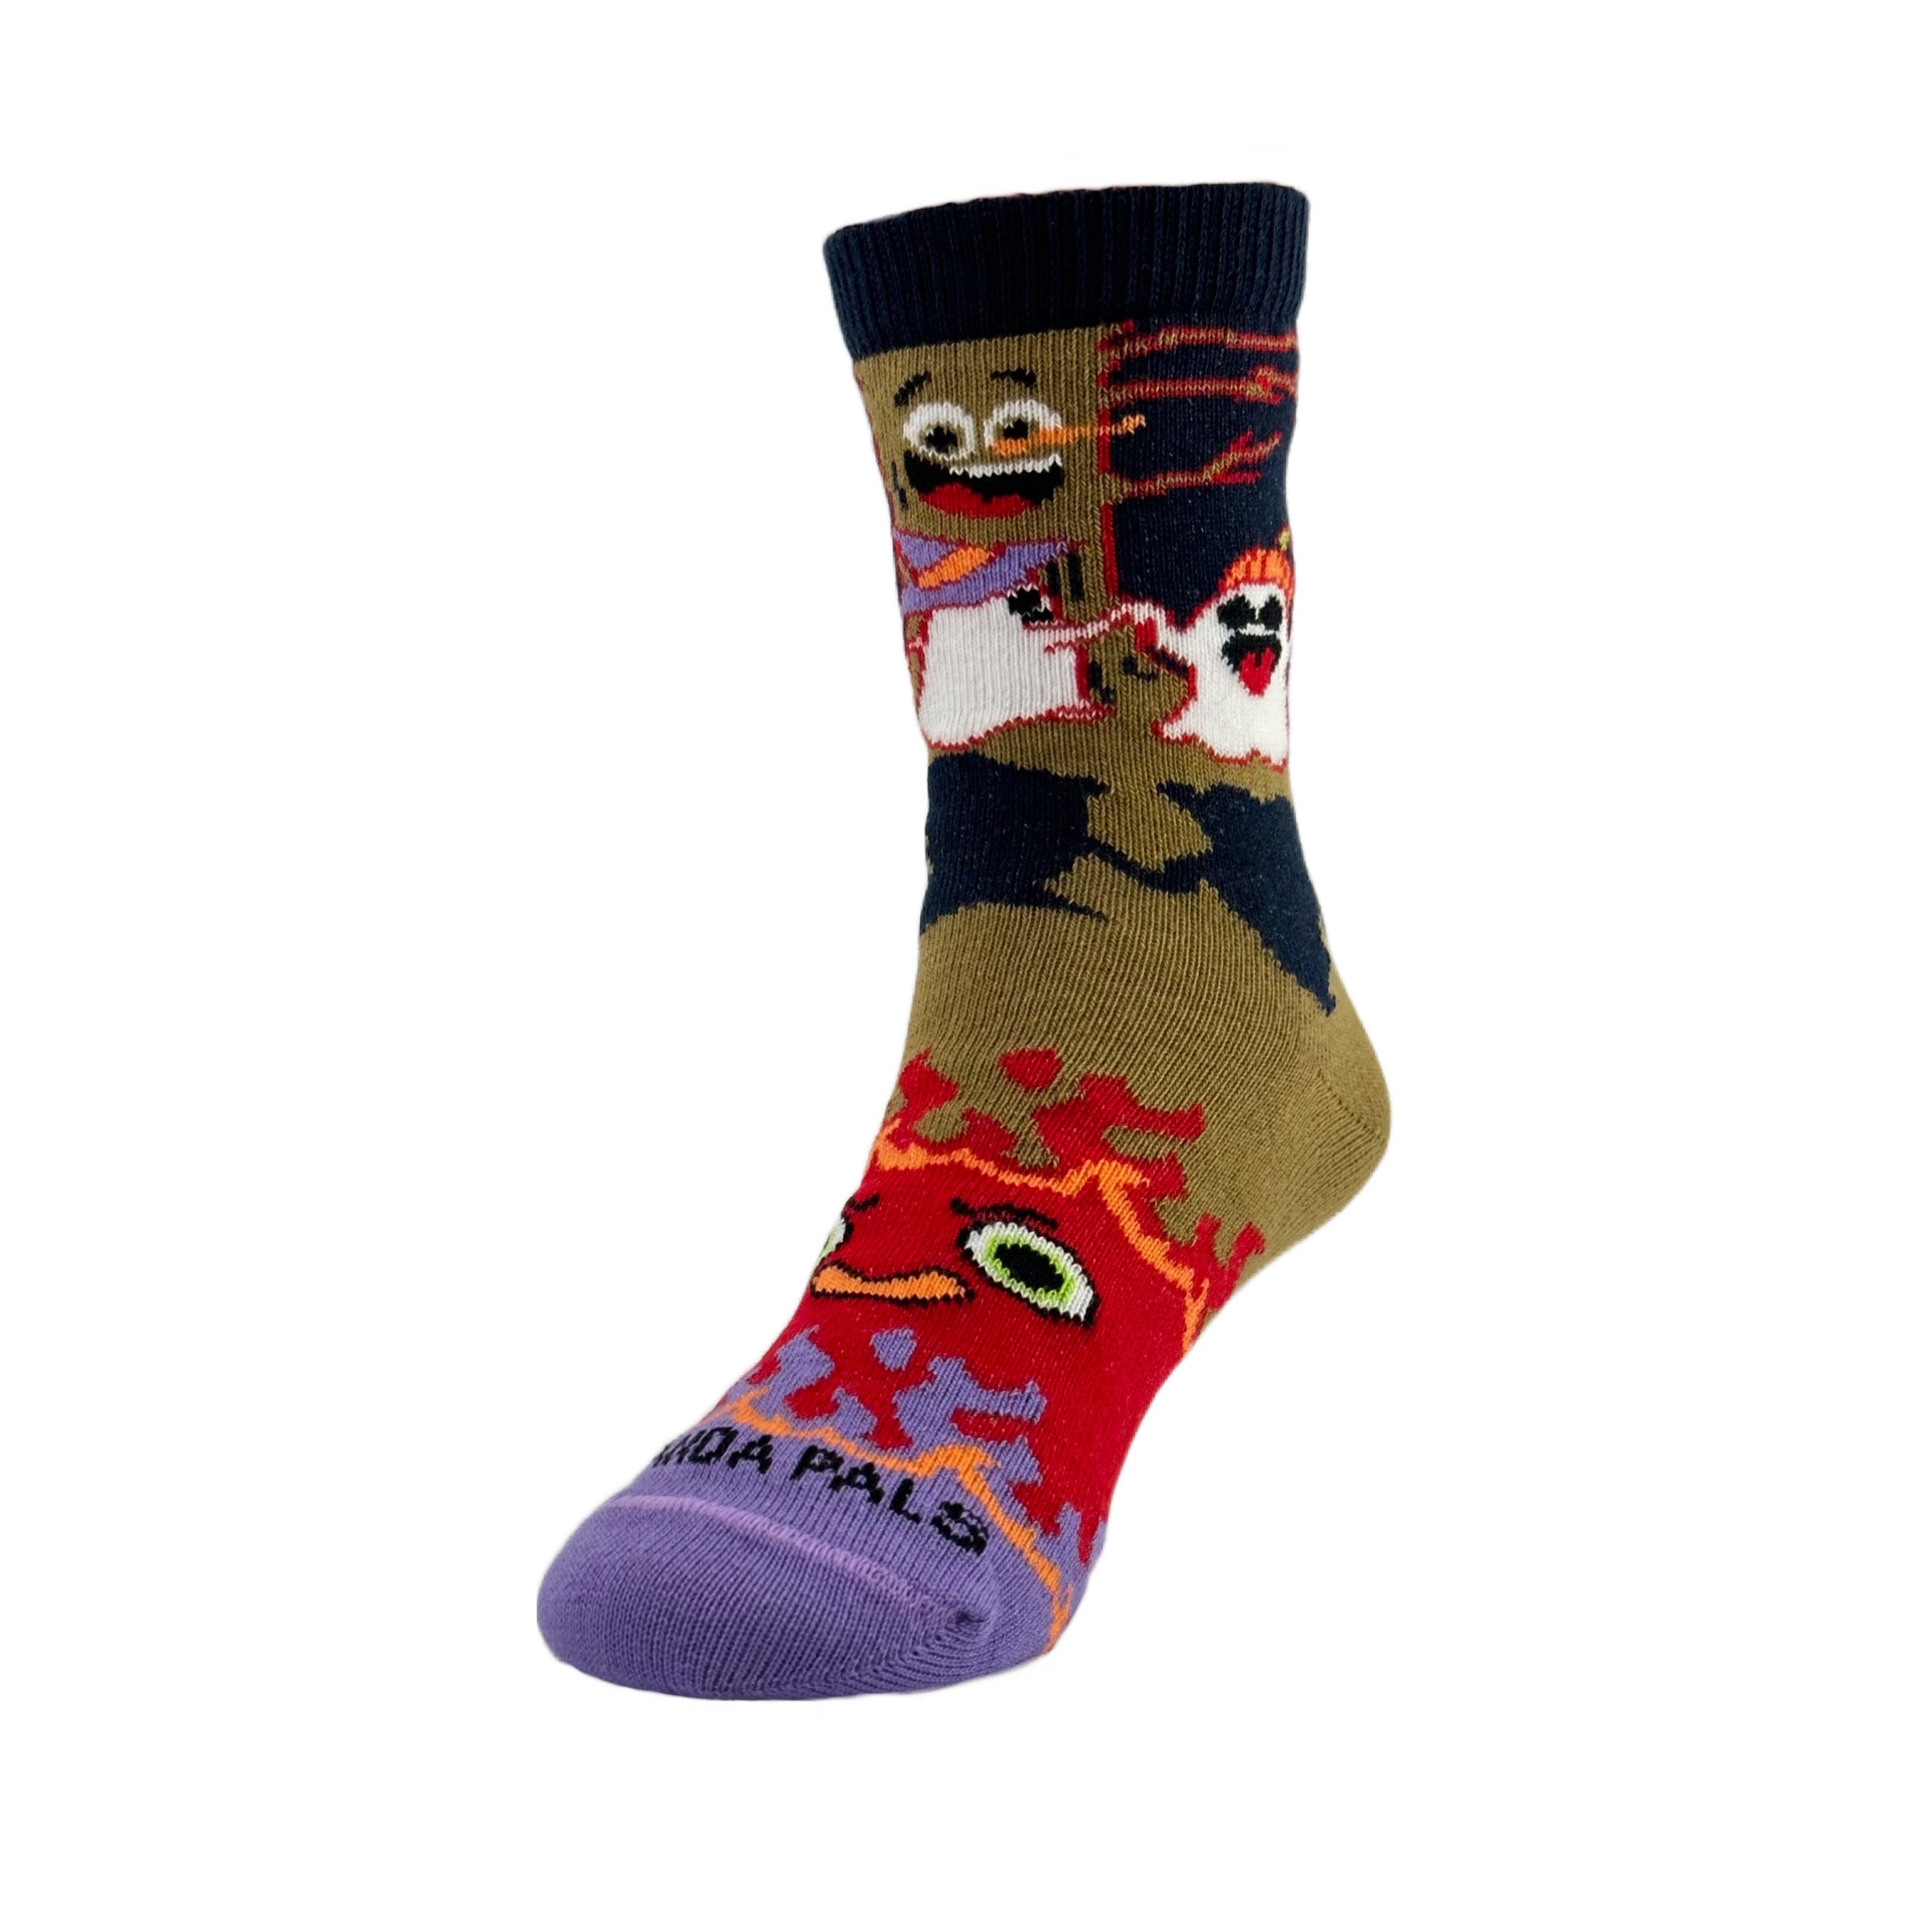 Spooky Ghost Party Socks the Sock Panda (Ages 3-7)